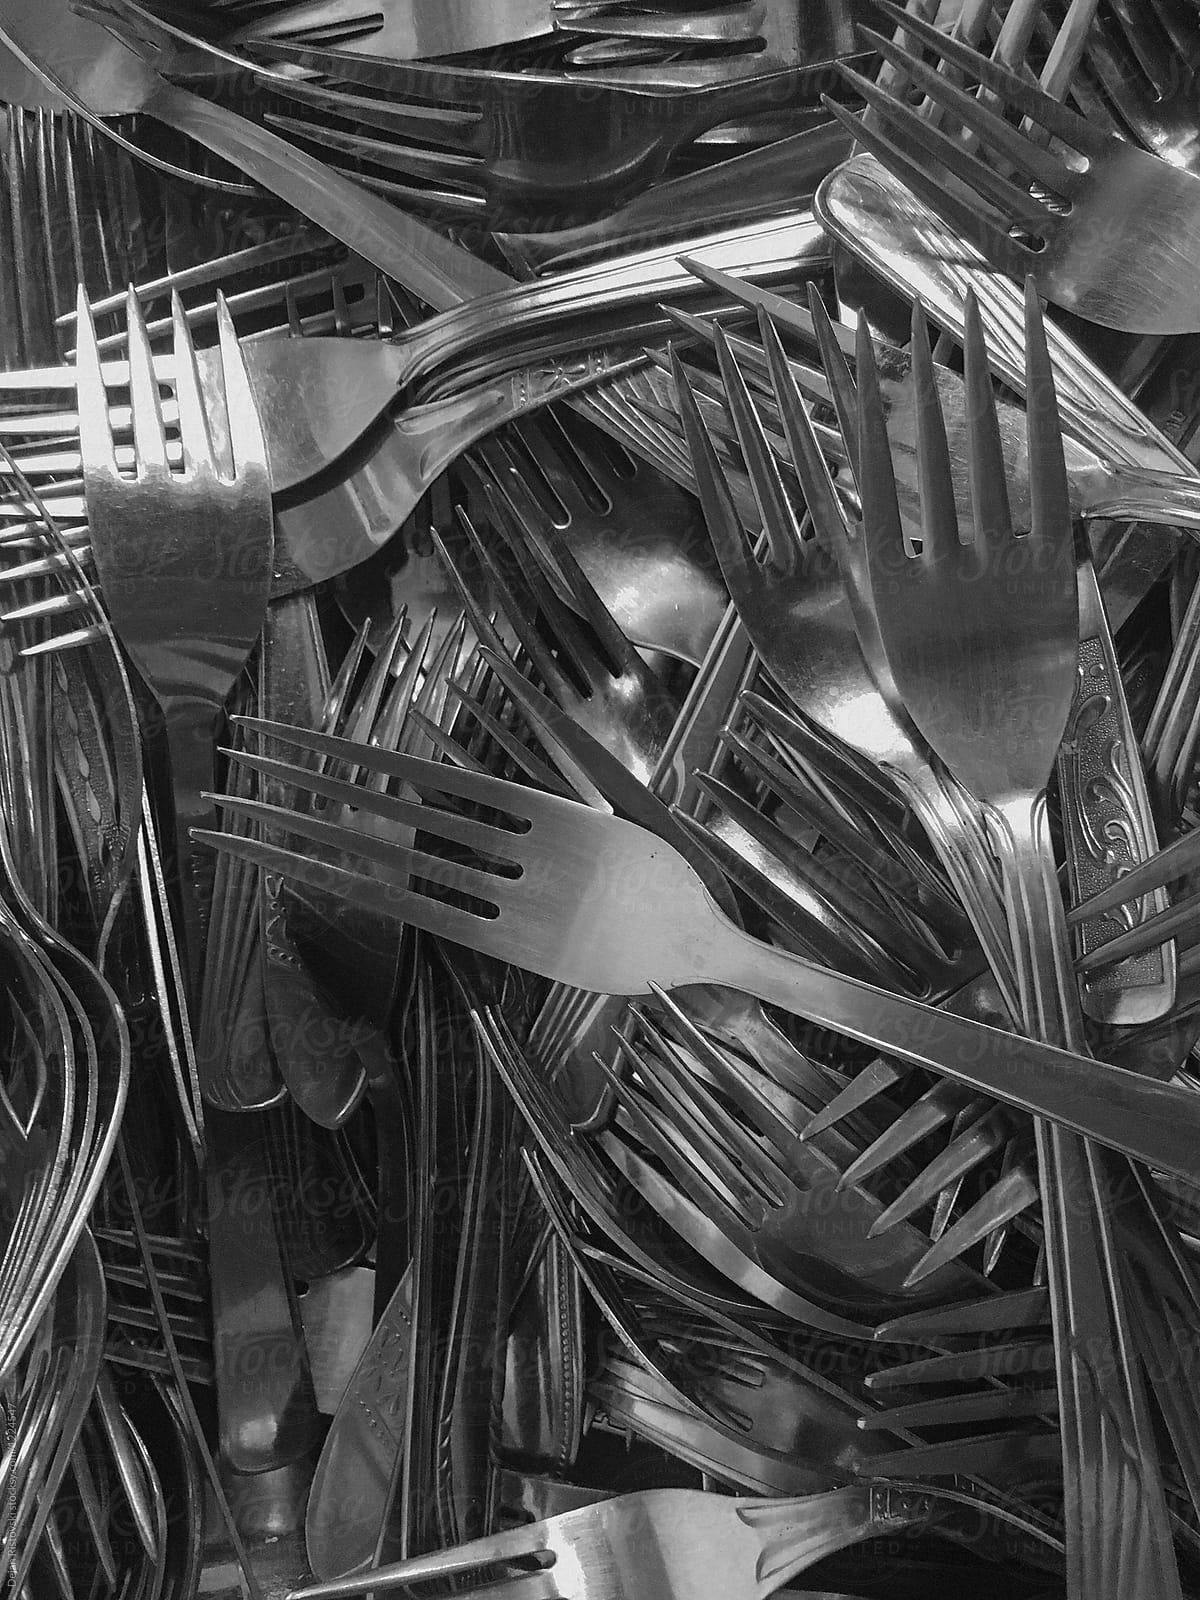 A bunch of forks in a drawer.